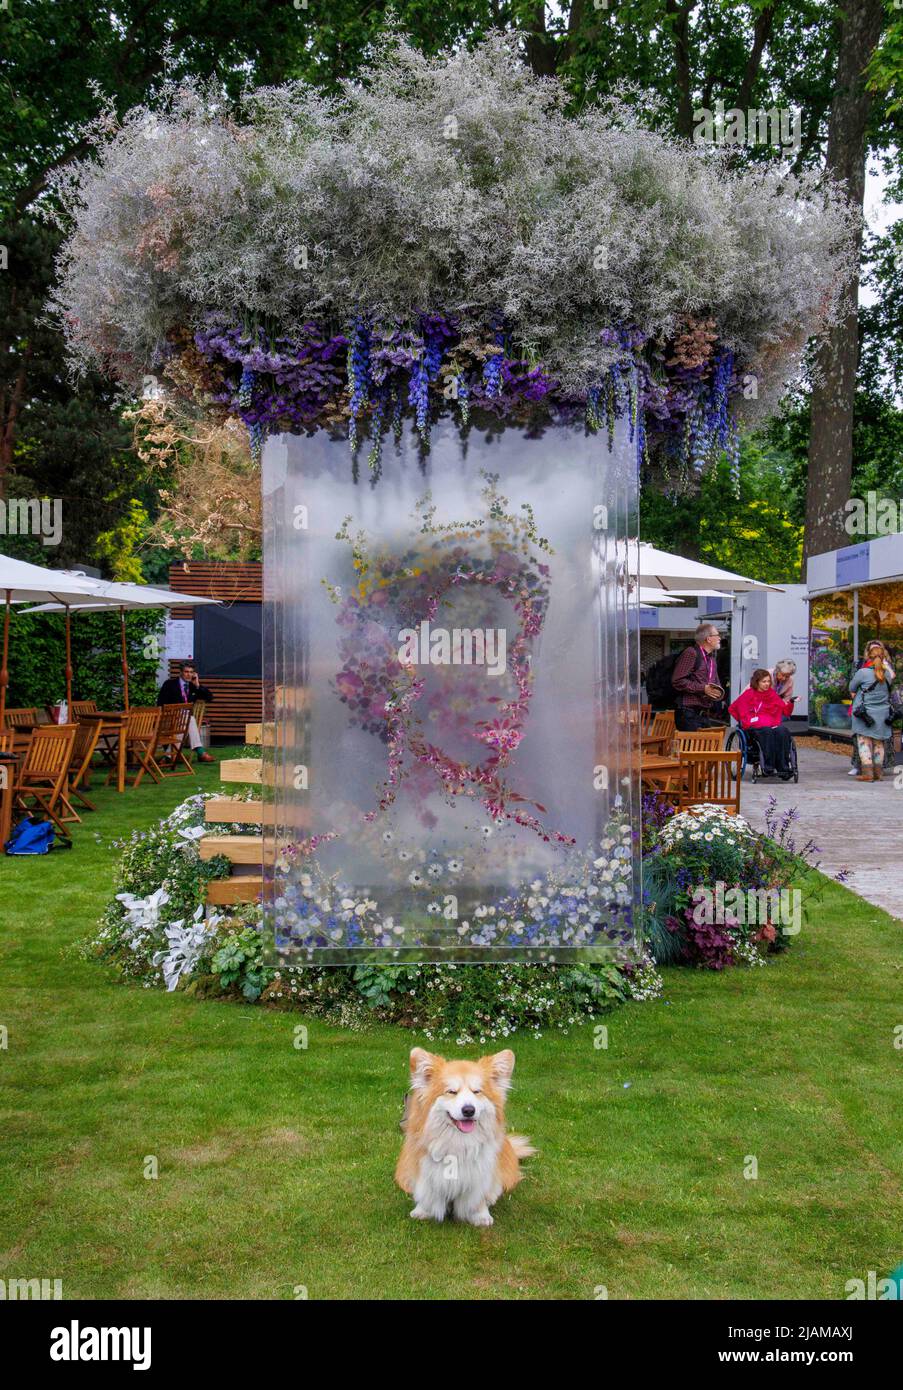 Celebrating the Queen's love for nature, an installation by floral designers Veevers Carter features a canopy of flowers including  Delphiniums. Stock Photo